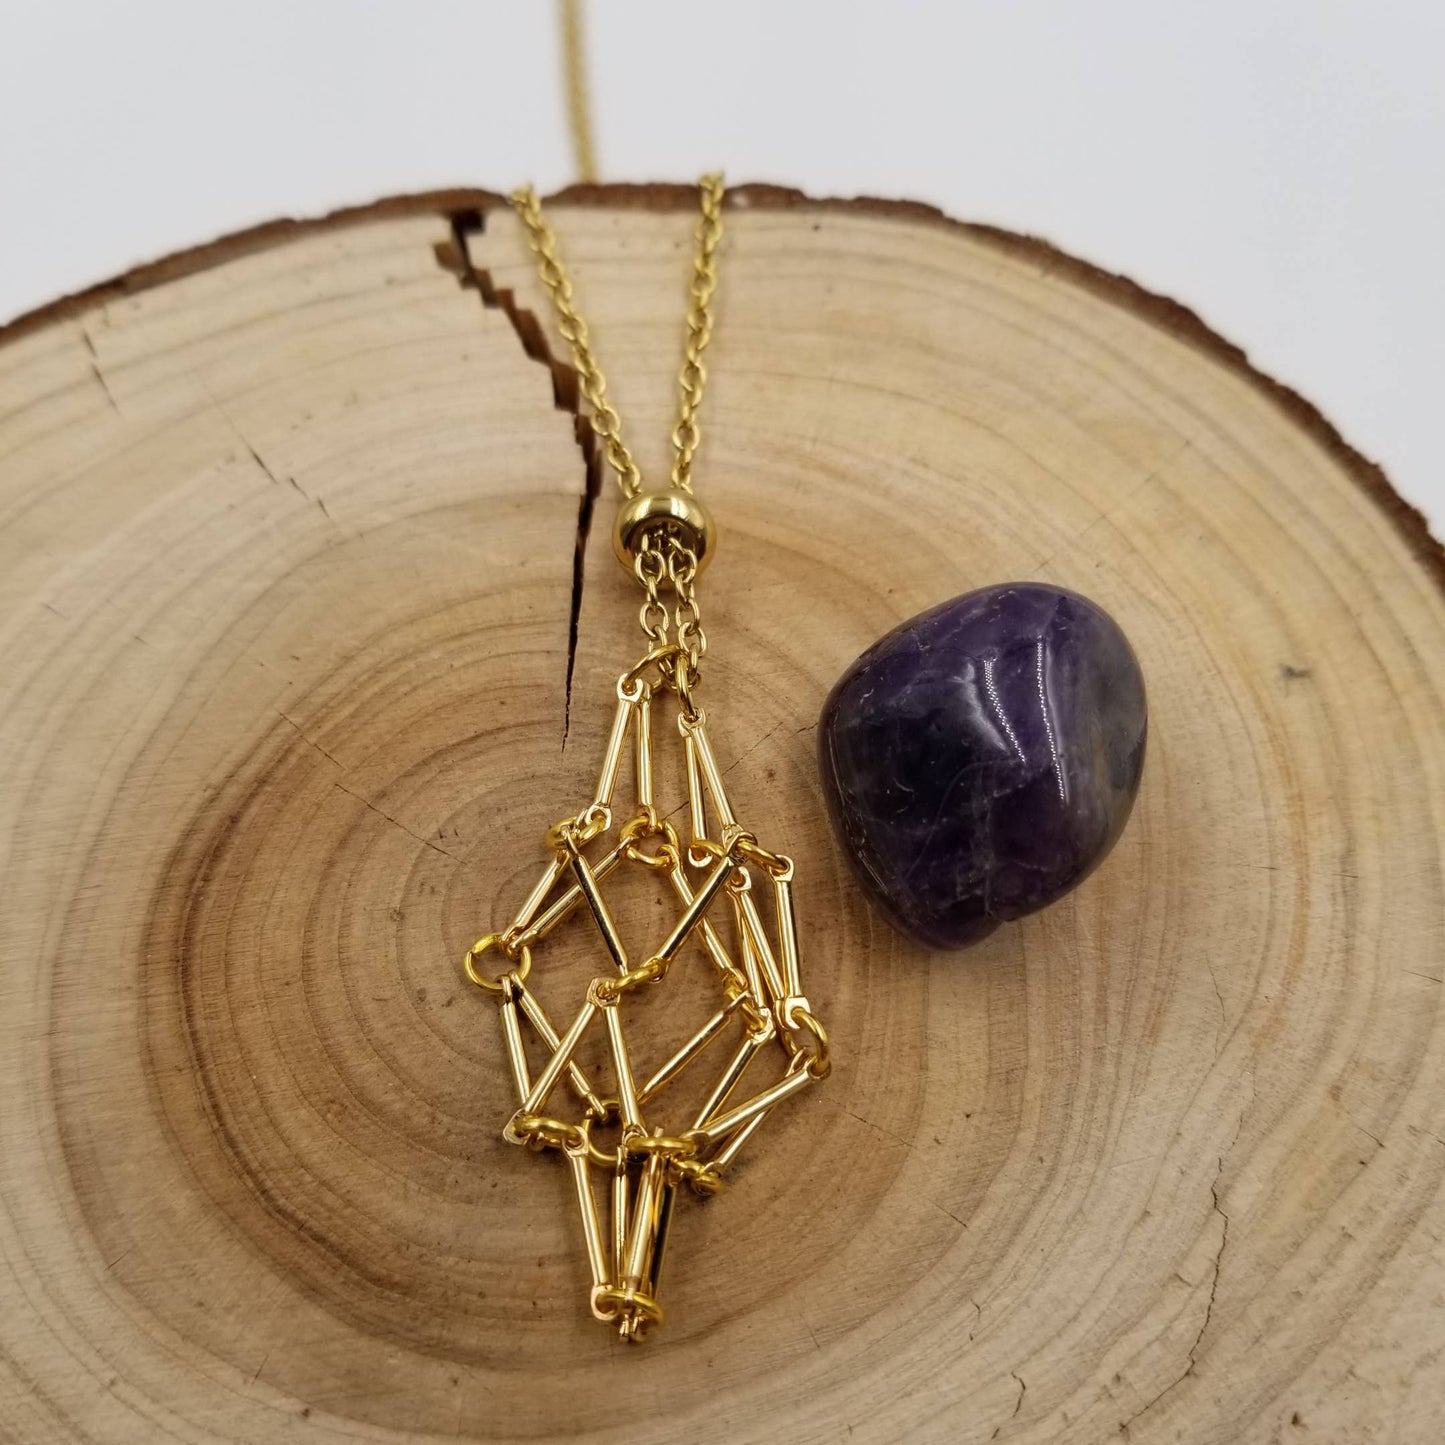 CHAKRA JEWELRY - Gold Interchangeable Macramé Cage Necklaces Without Stone: Without Stone (Only Necklaces)